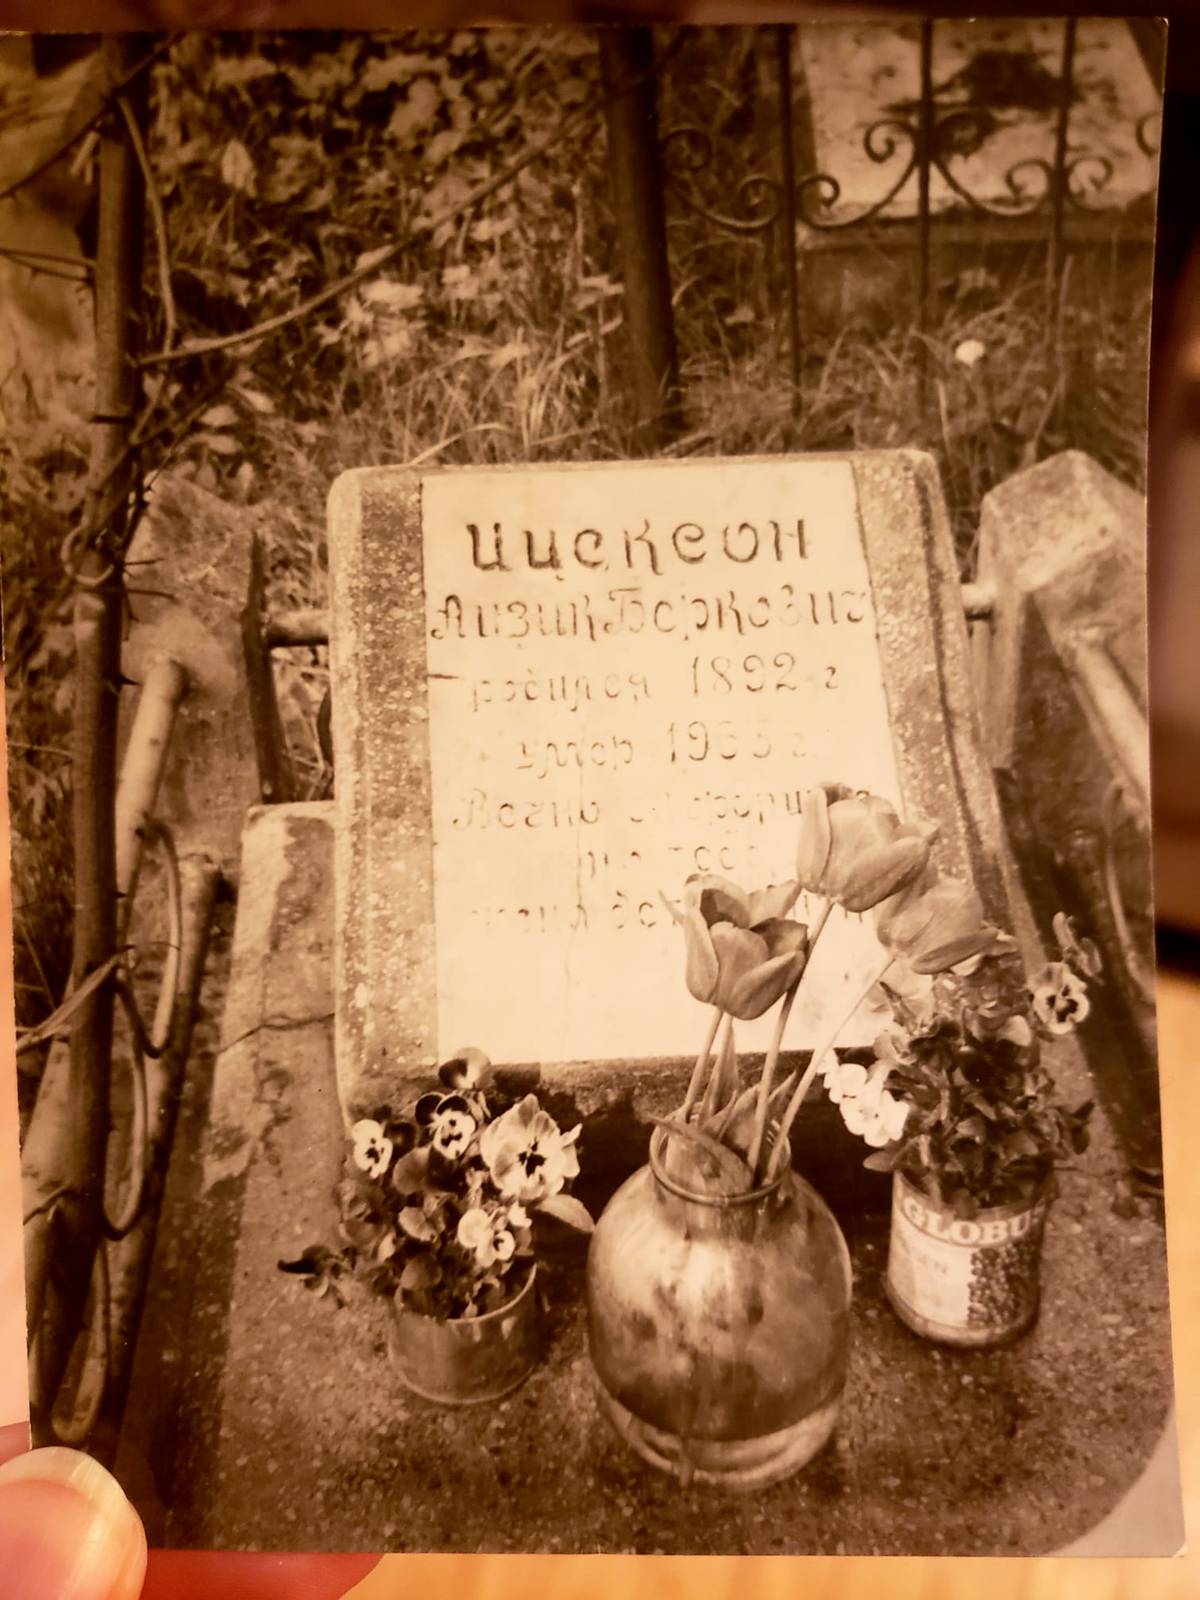 The photo of Itsik's grave